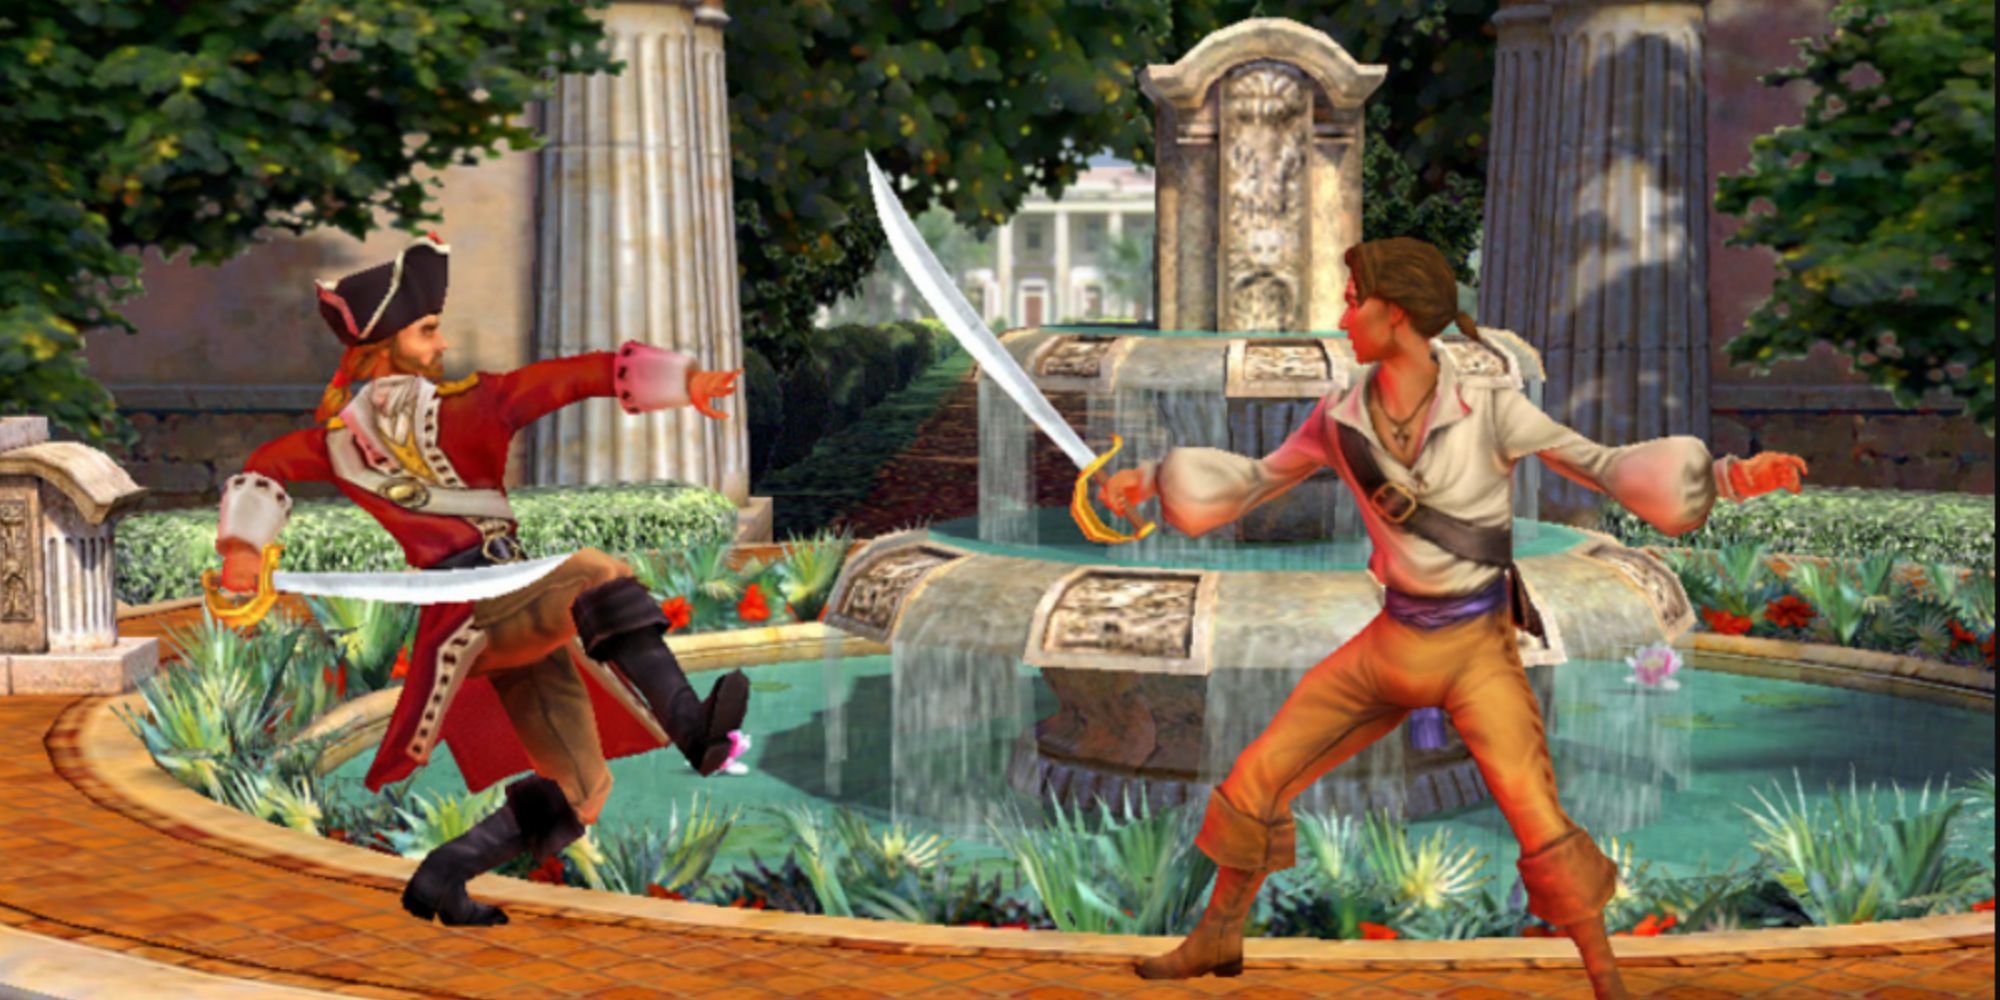 pirates having a fancy swordfight on a fountain in sid meier's pirates!